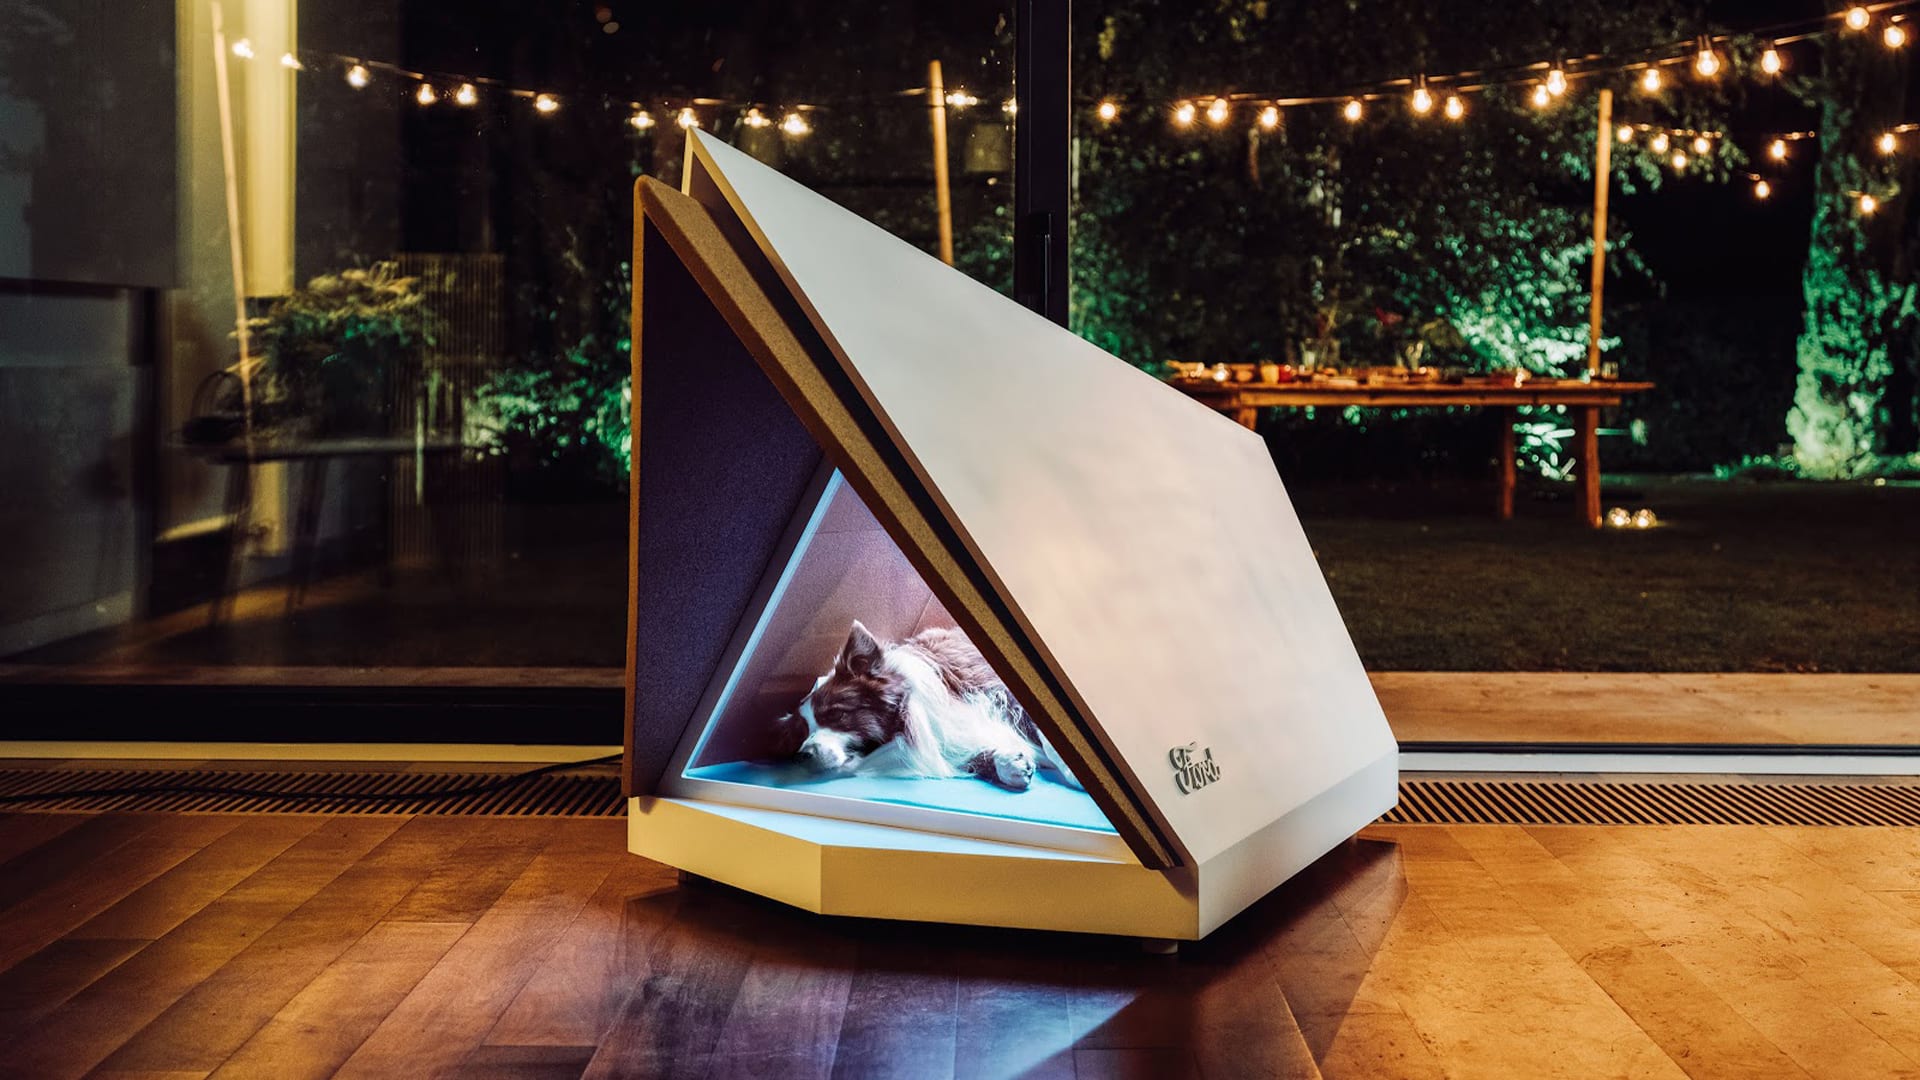 This noise-canceling dog house is perfect for pups who hate thunder